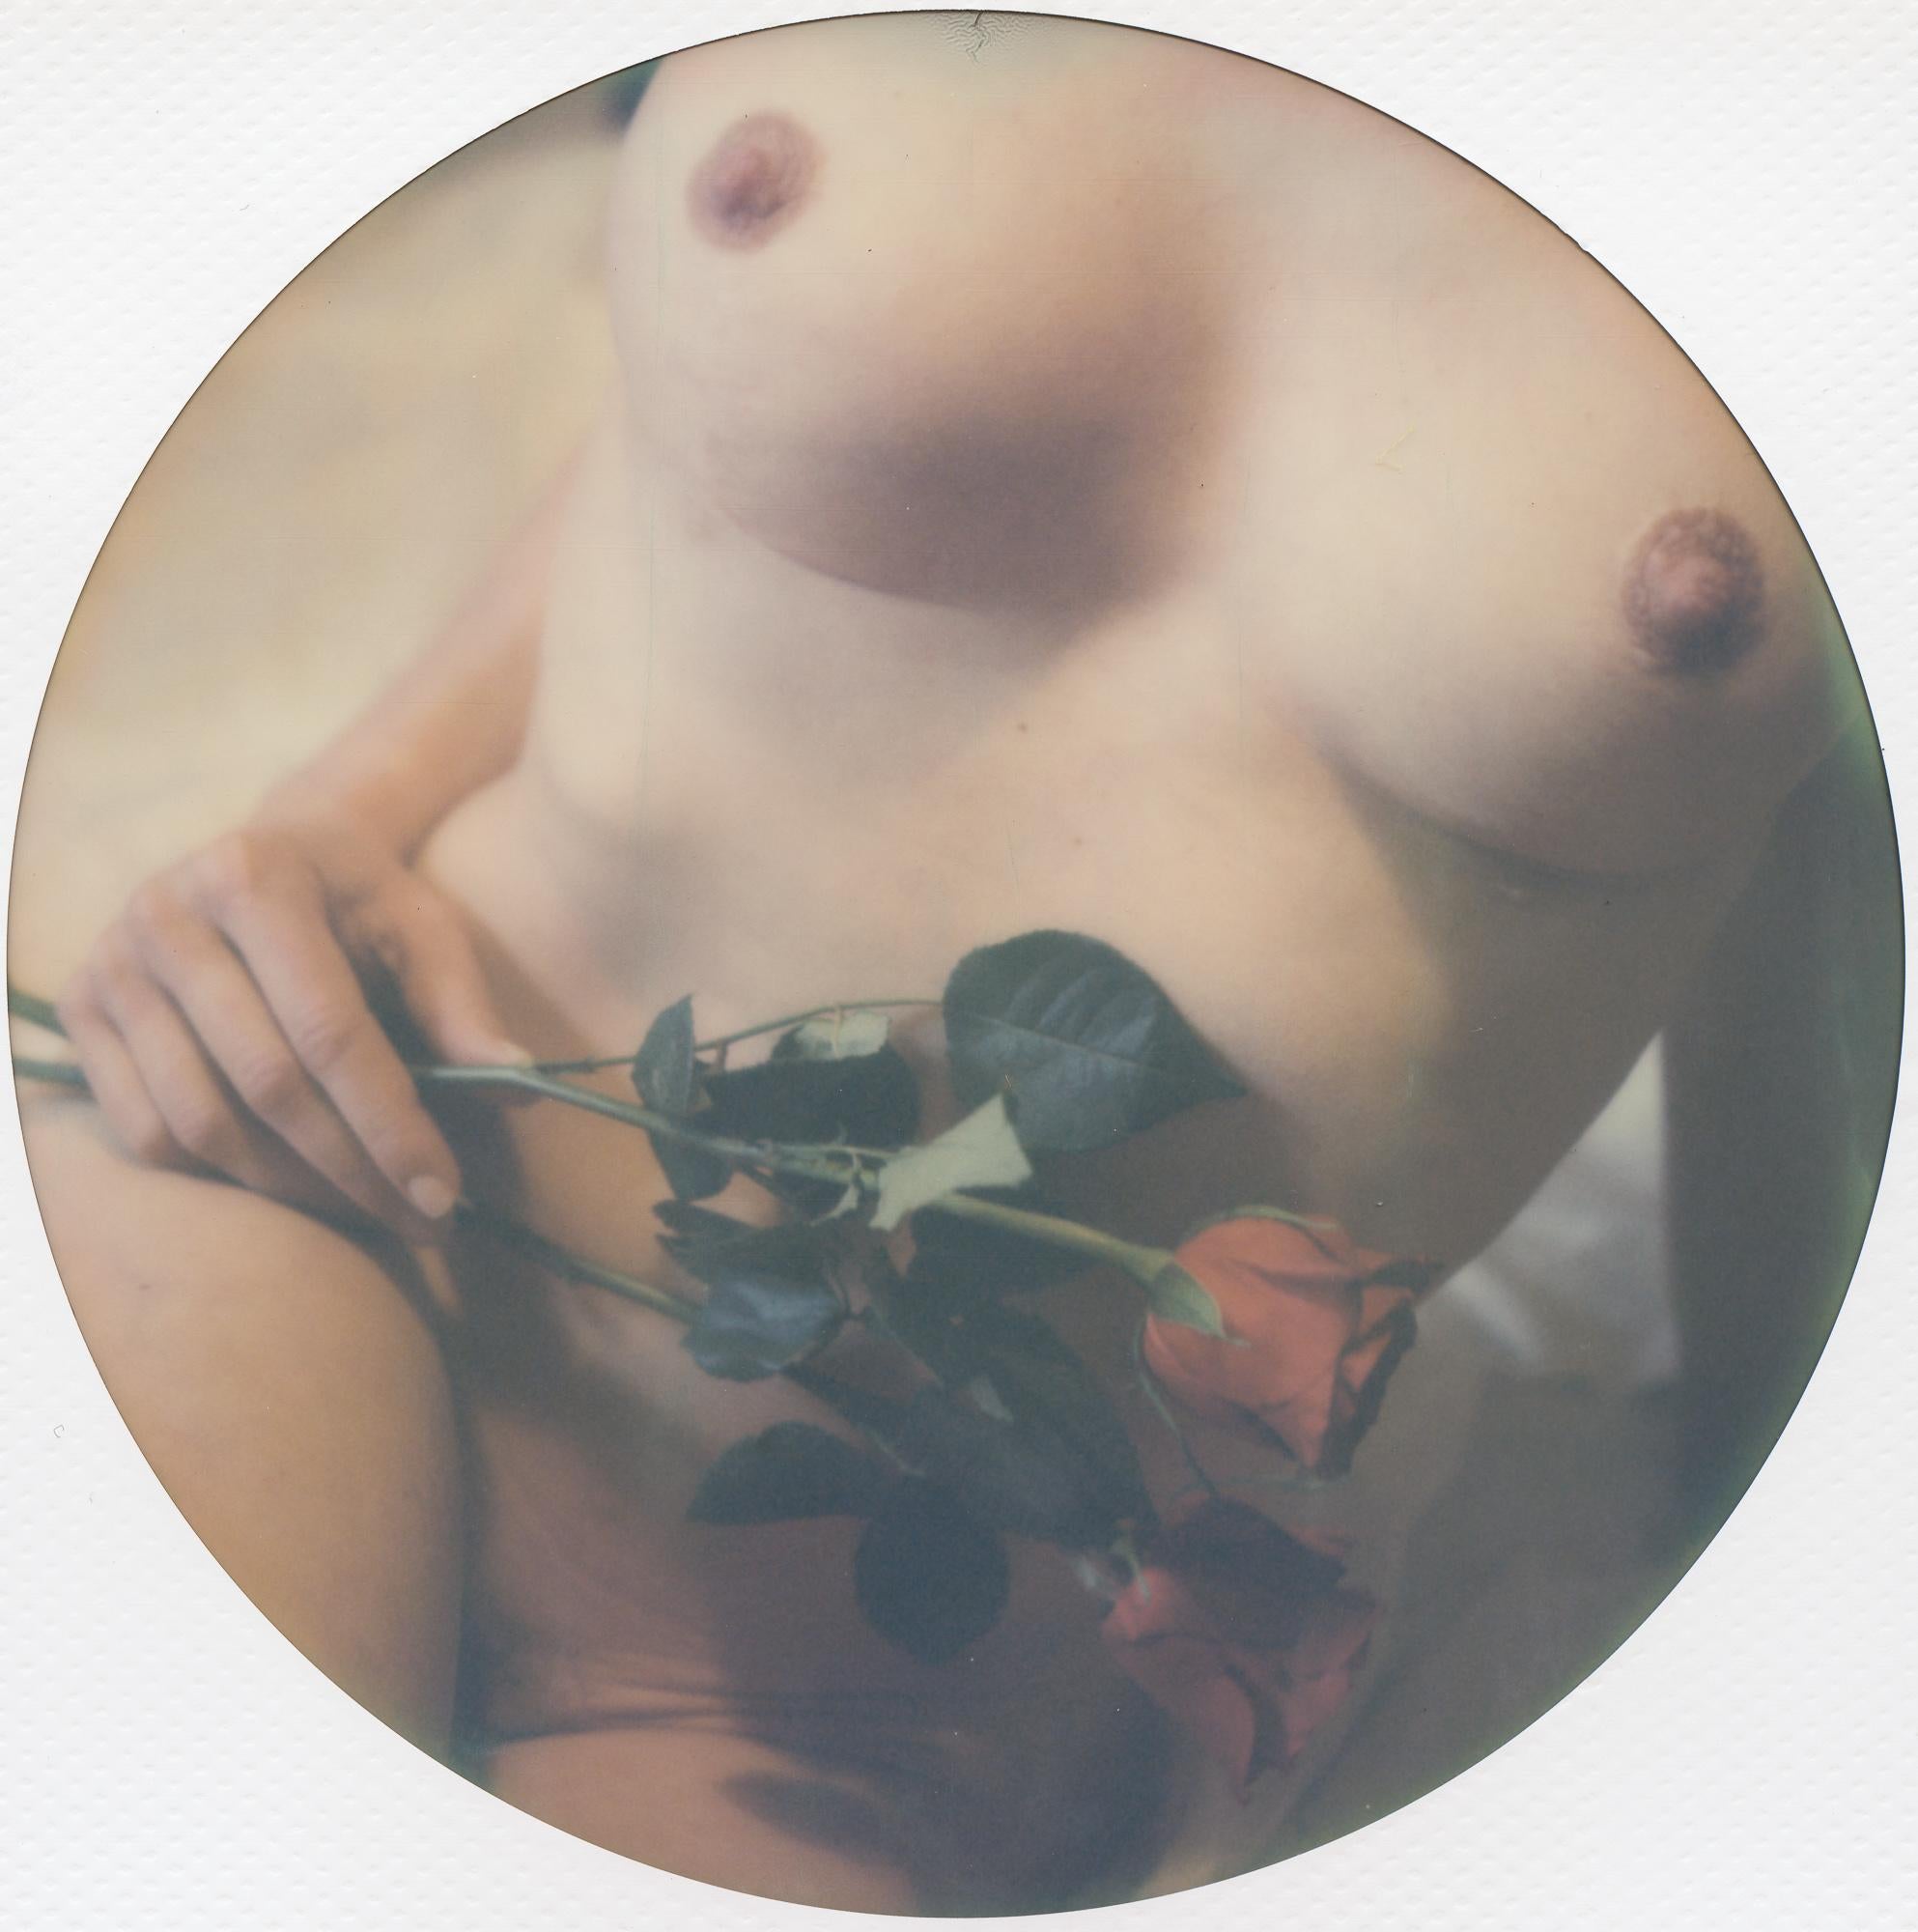 Roses are Red, 2018, 40x40cm, Edition 2/7 plus 2 Artist Proofs, Digital C-print, based on a Polaroid, not mounted. Signed on the back and with certificate. Artist inventory PL2018-430.

Kirsten Thys van den Audenaerde is a self-taught freelance